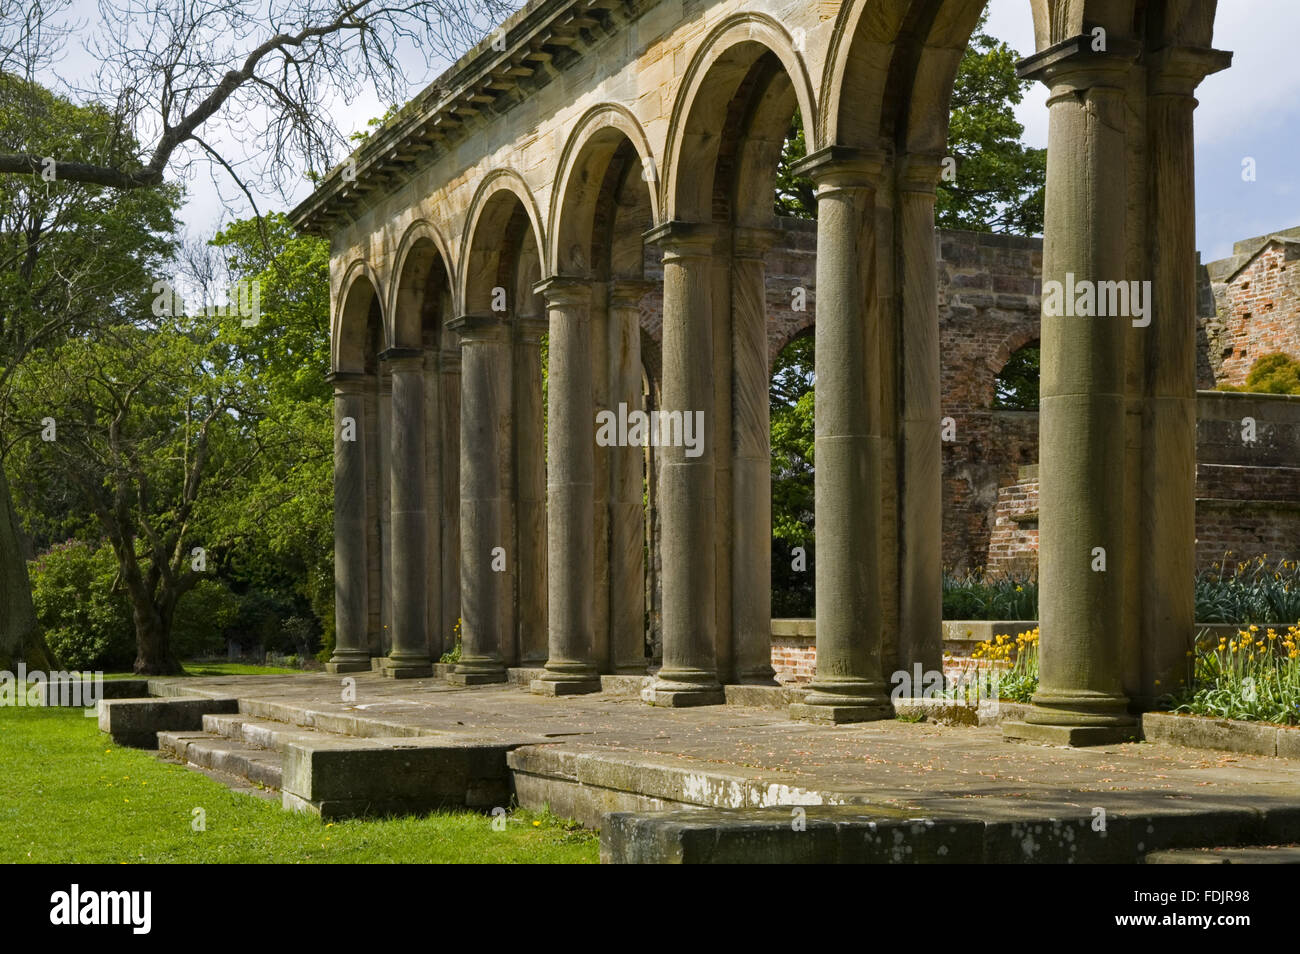 The Tuscan columns of the Orangery, which was begun in 1772 to a design attributed to James Paine, at Gibside, Newcastle upon Tyne. George Bowes inherited the estate in 1722 and landscaped the grounds and created buildings around Gibside Hall. Stock Photo